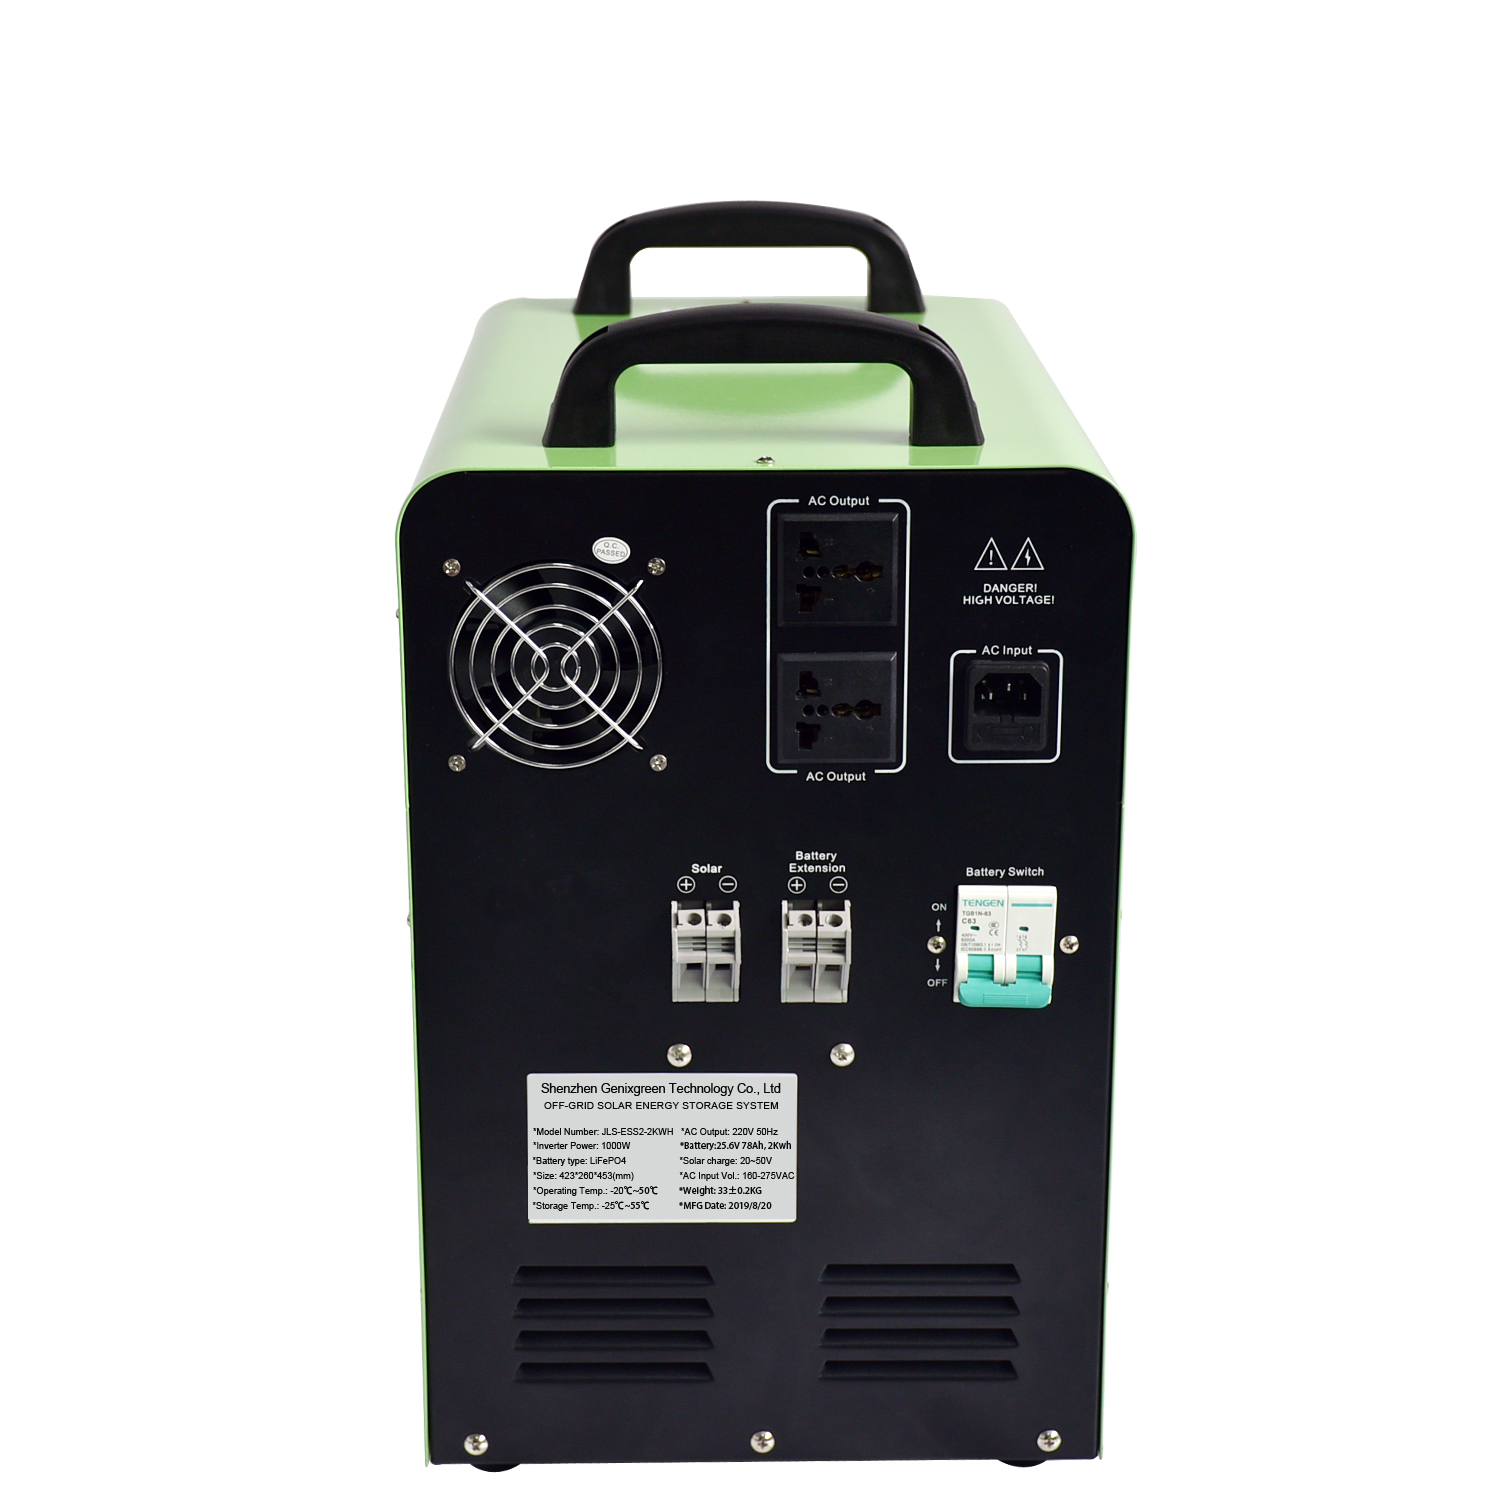 25.6V 78Ah LiFePo4 Energy Storage System With Controller And Inverter  Built In